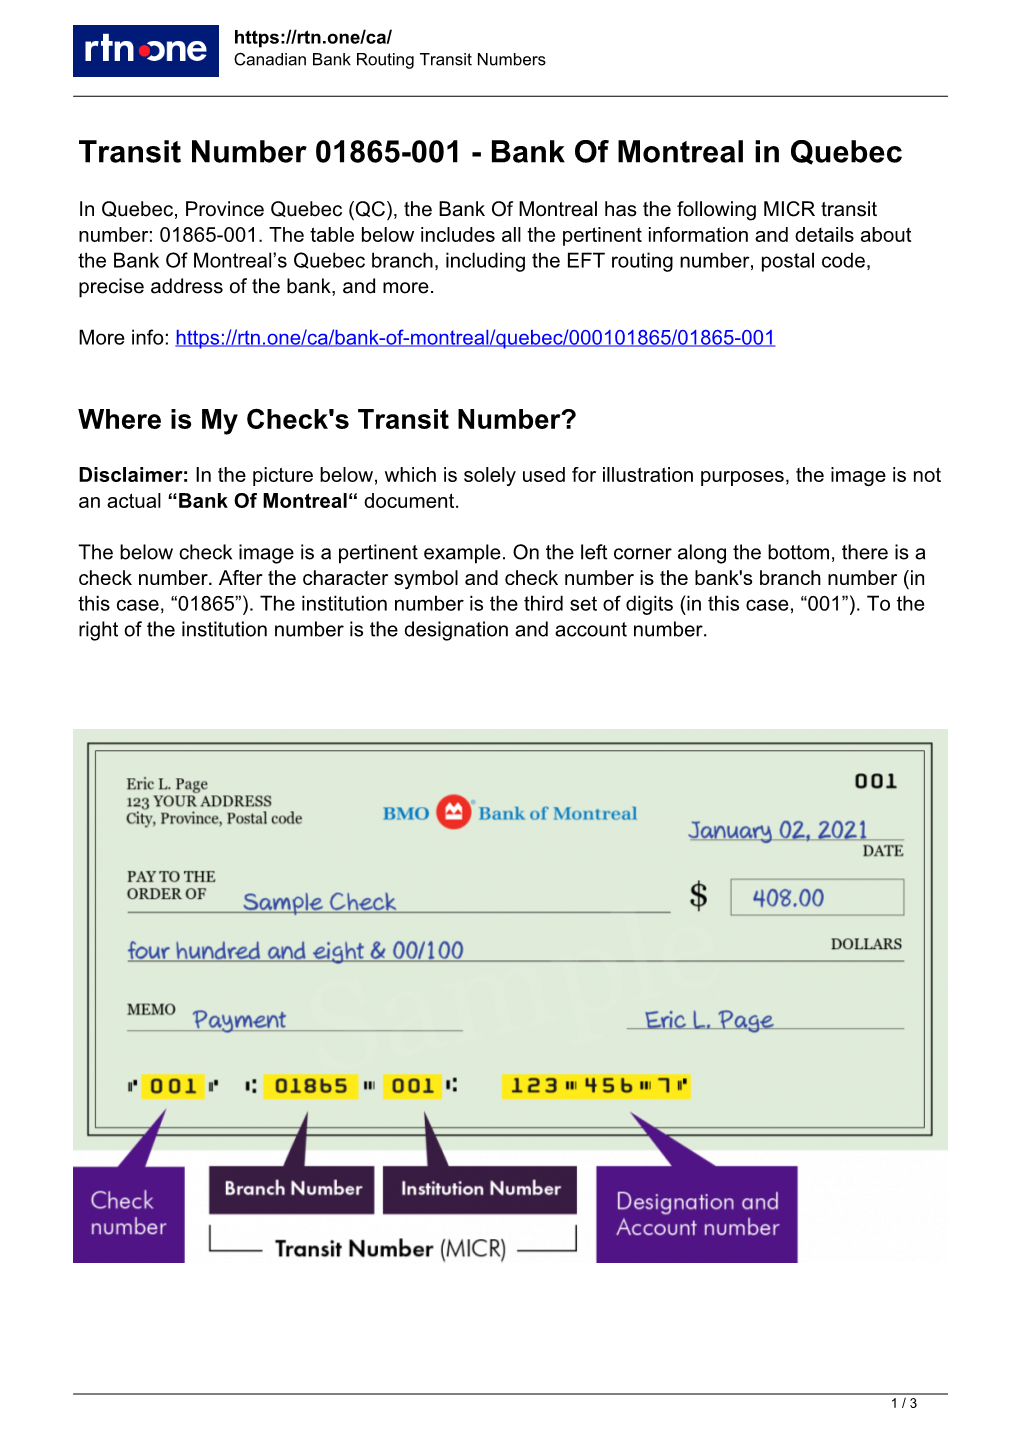 000101865 — Transit and Routing Numbers for the Bank of Montreal in Quebec